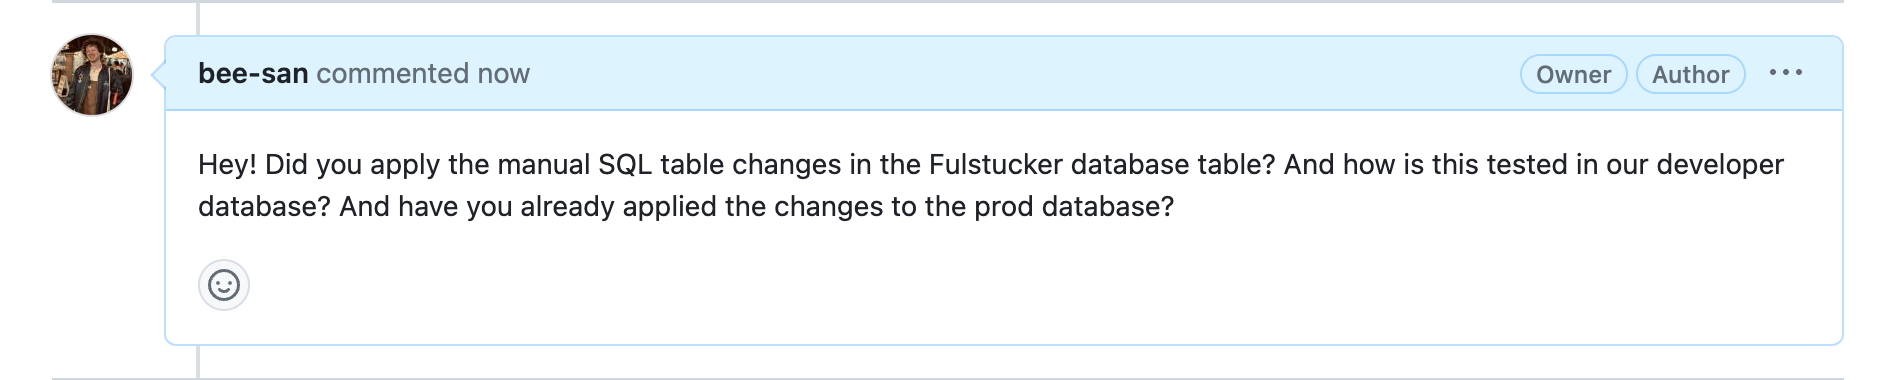 Sample pull request comment from someone asking me to make manual SQL changes